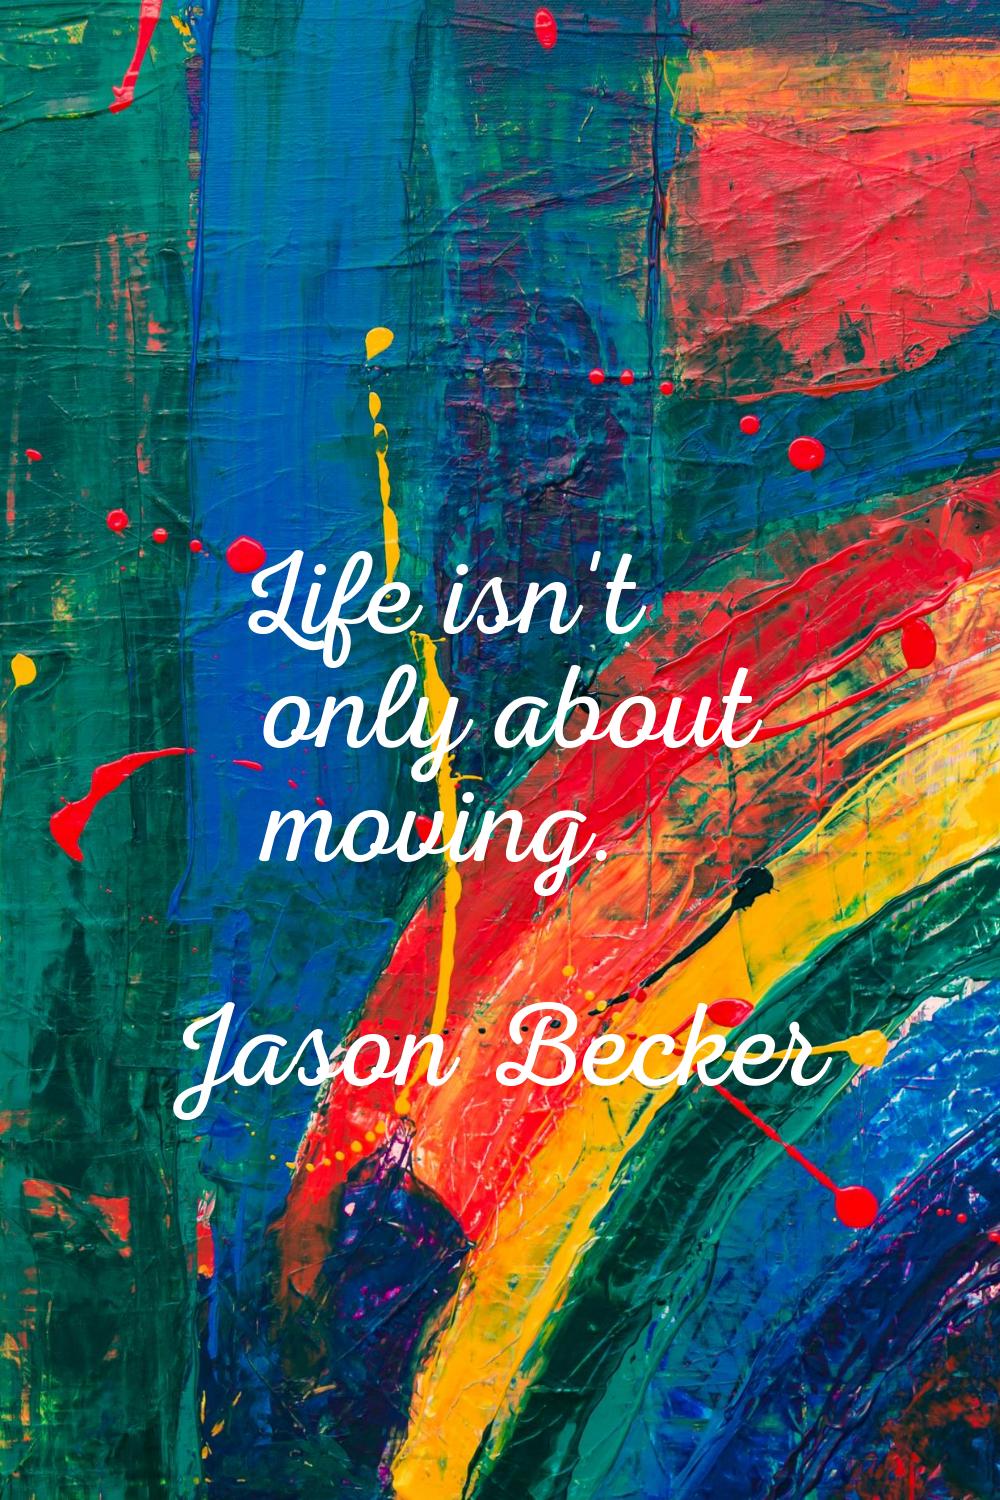 Life isn't only about moving.